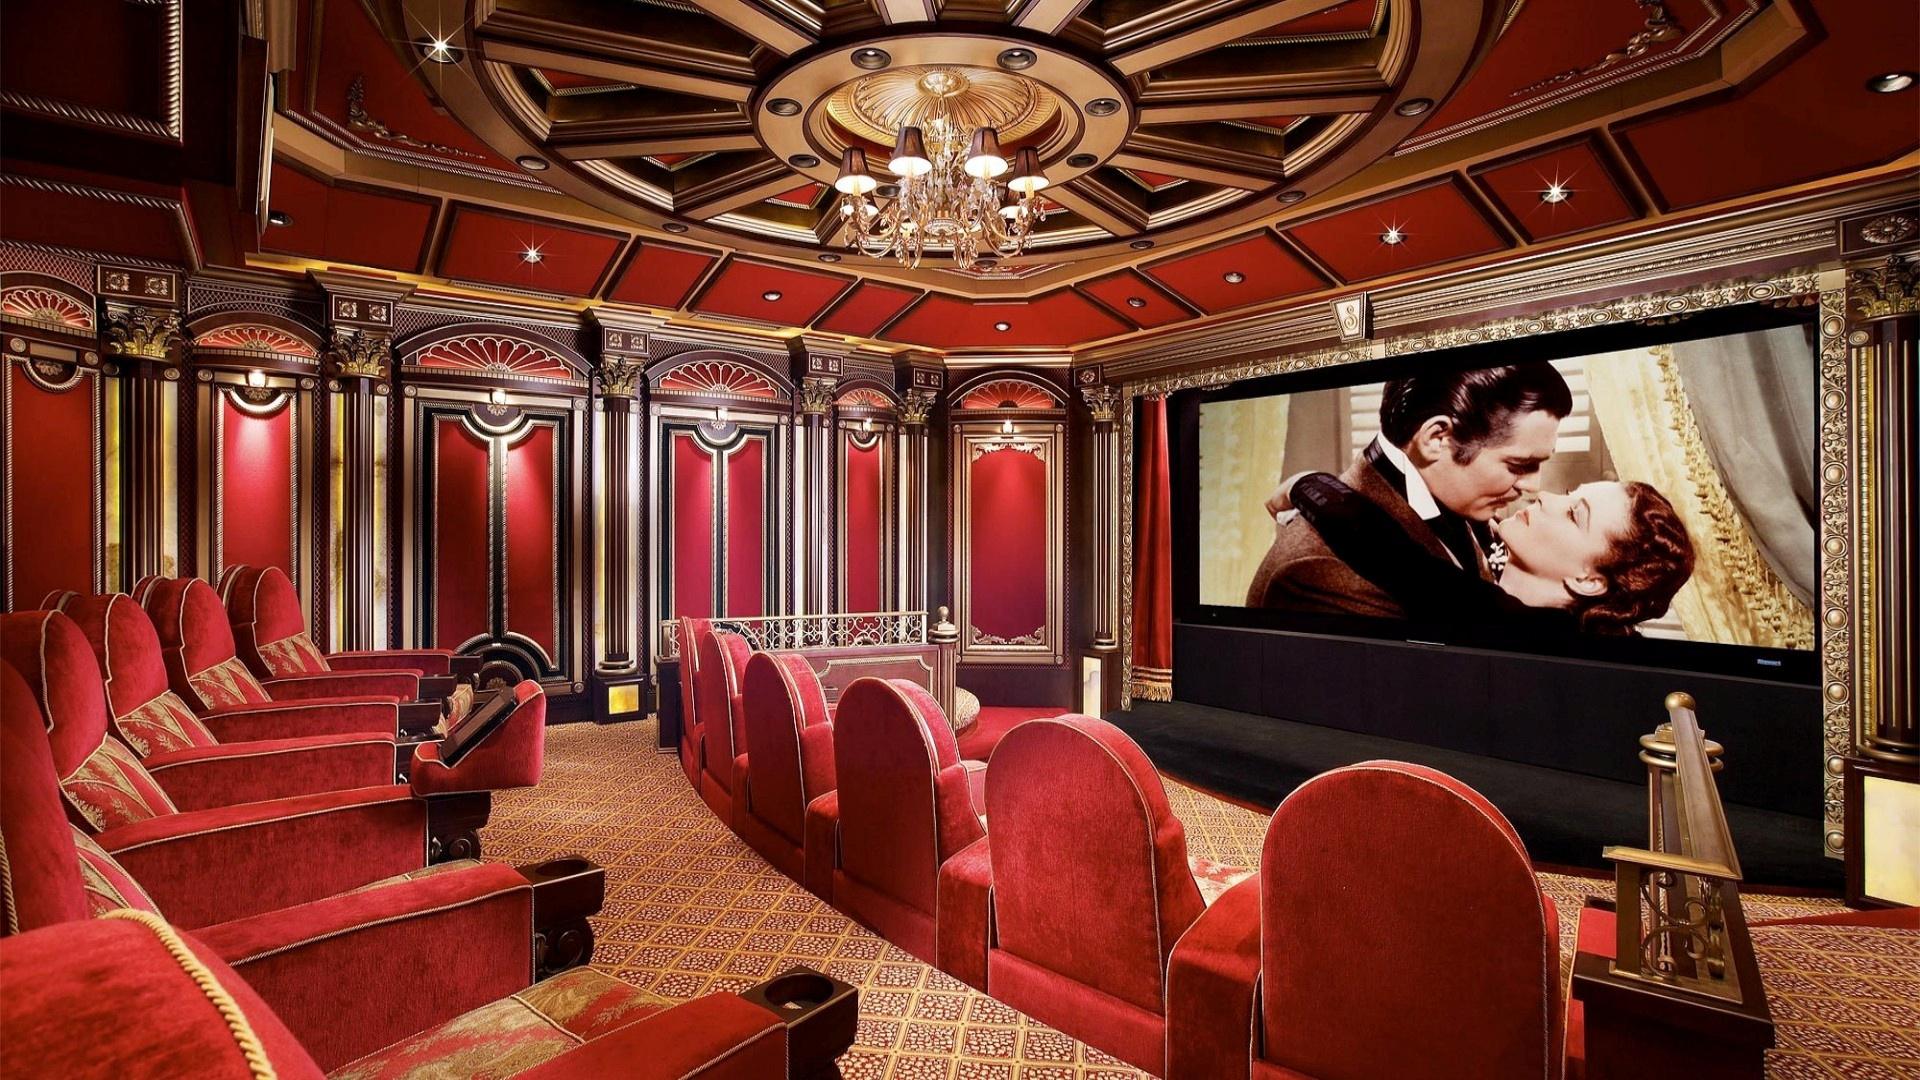 LUXURY HOME THEATER WALLPAPER - HD Wallpapers